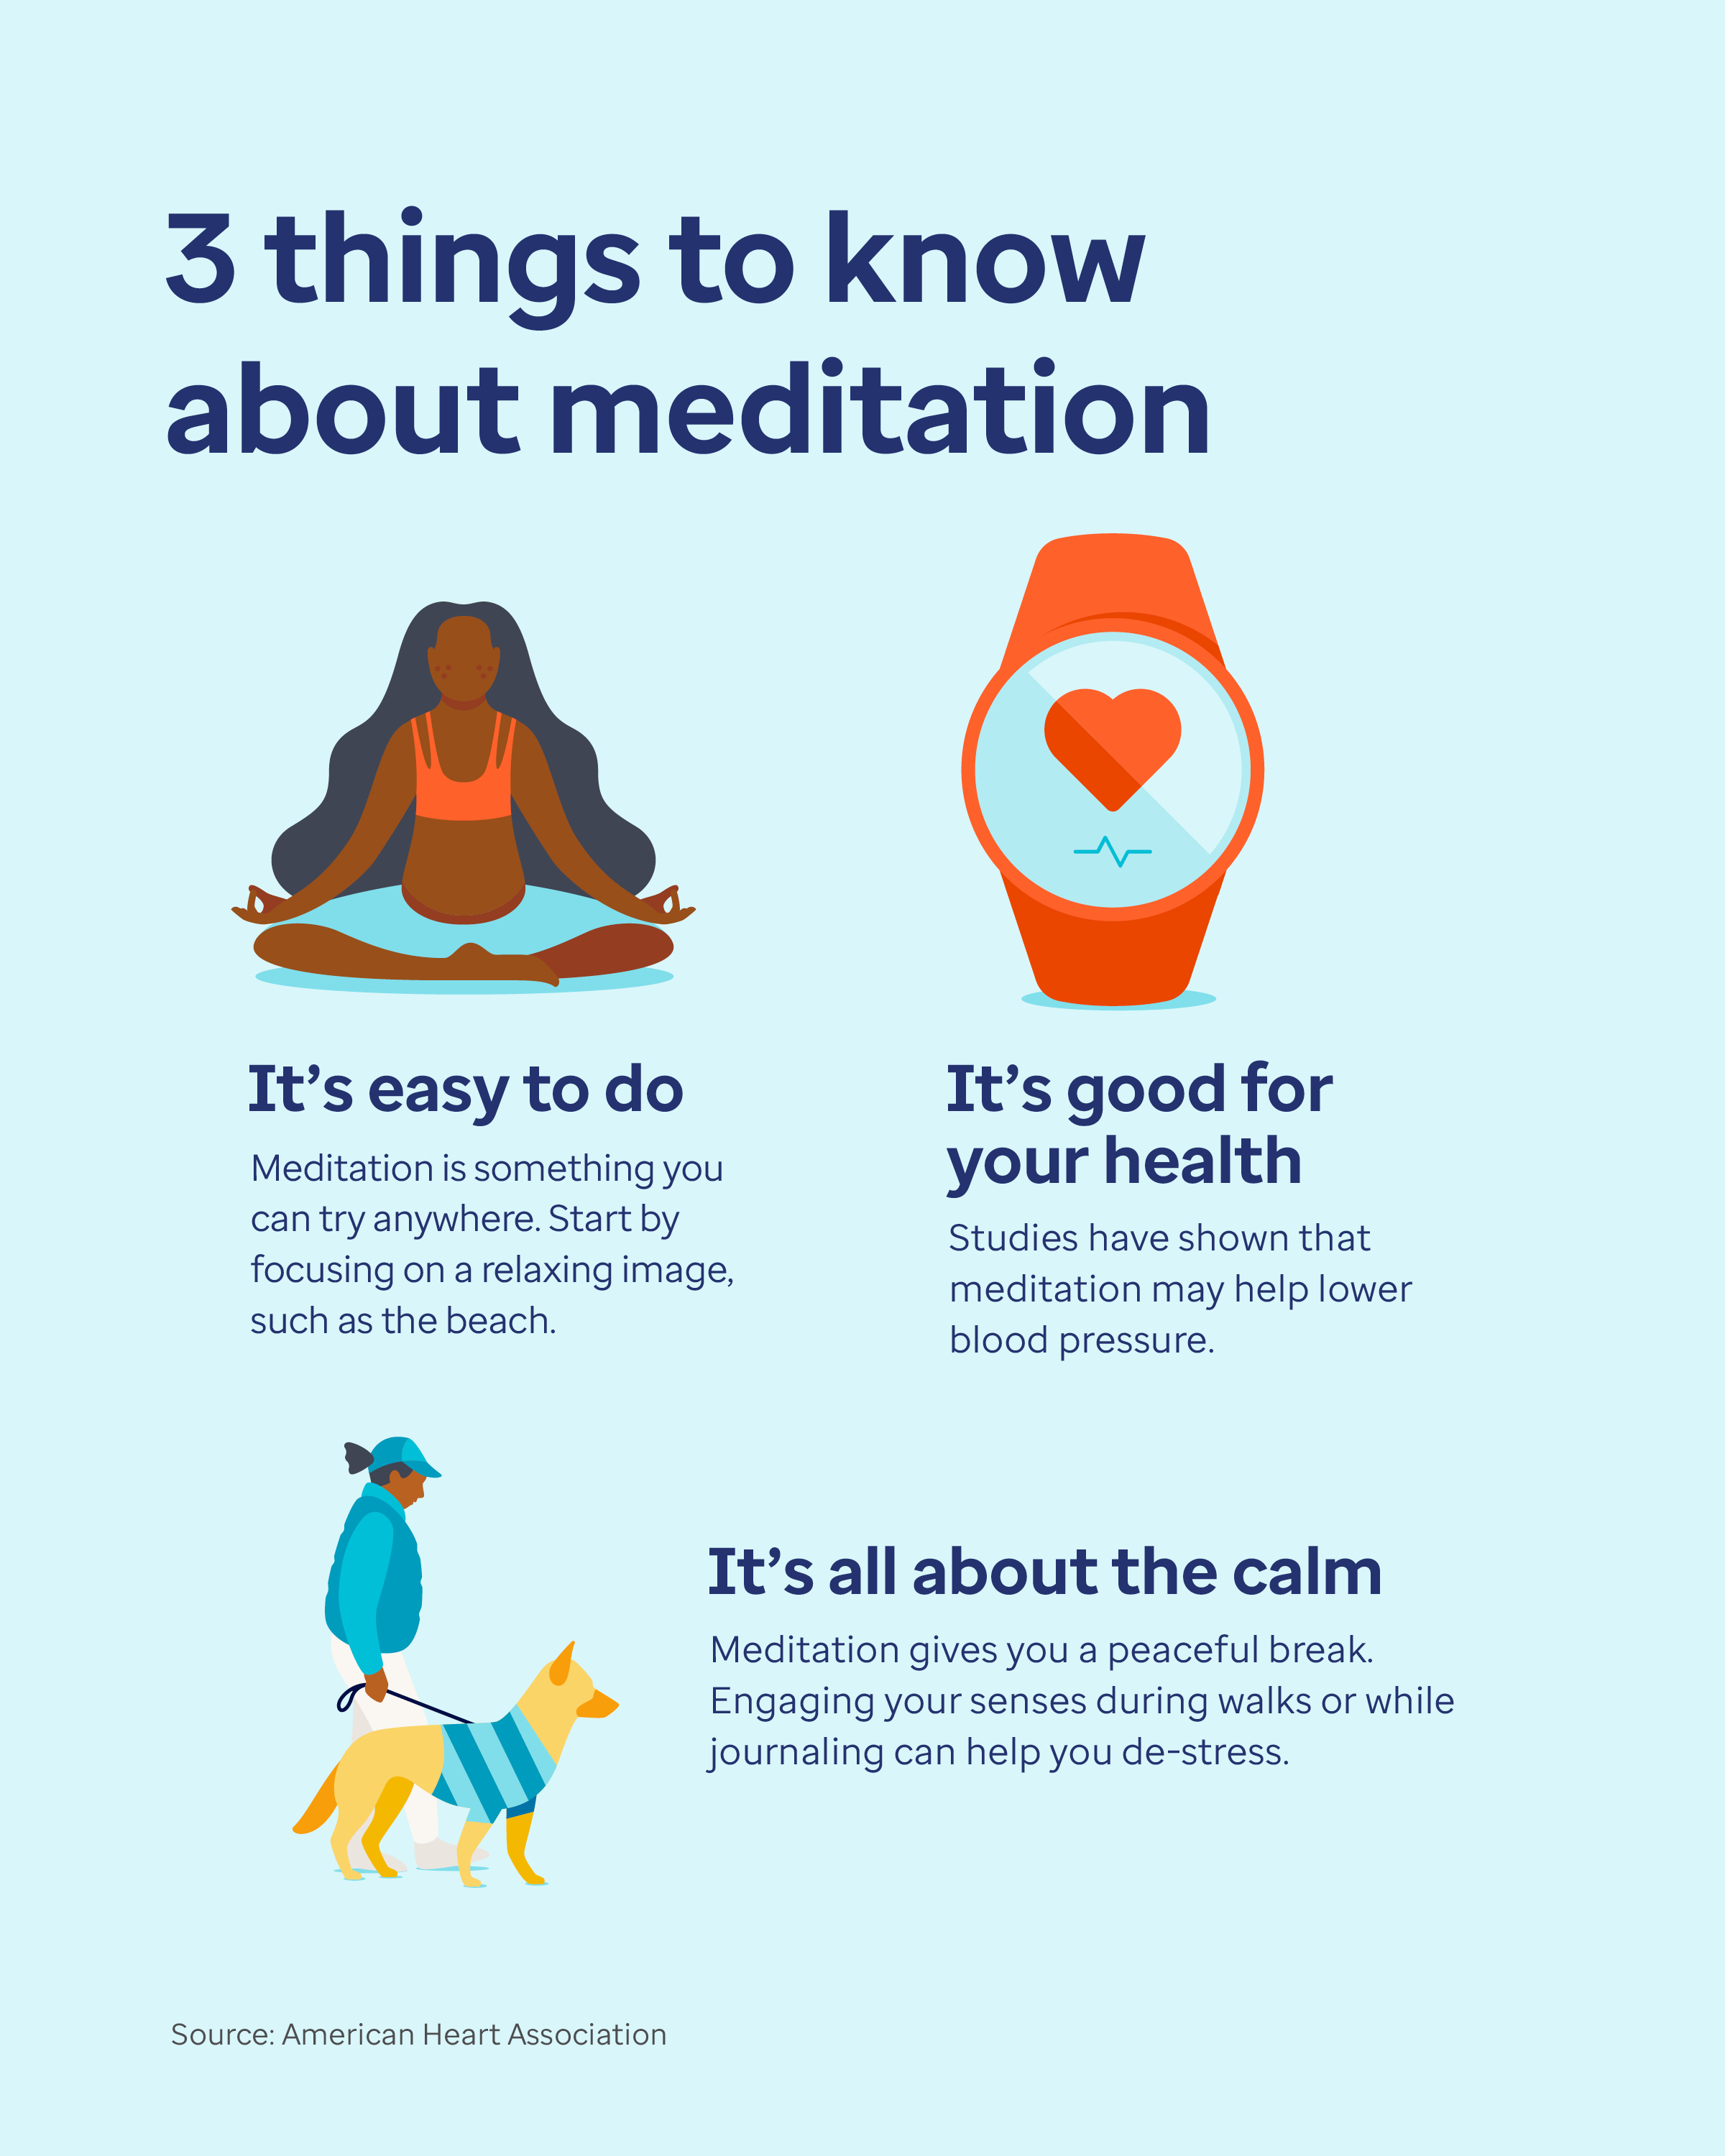 3 things to know about meditation